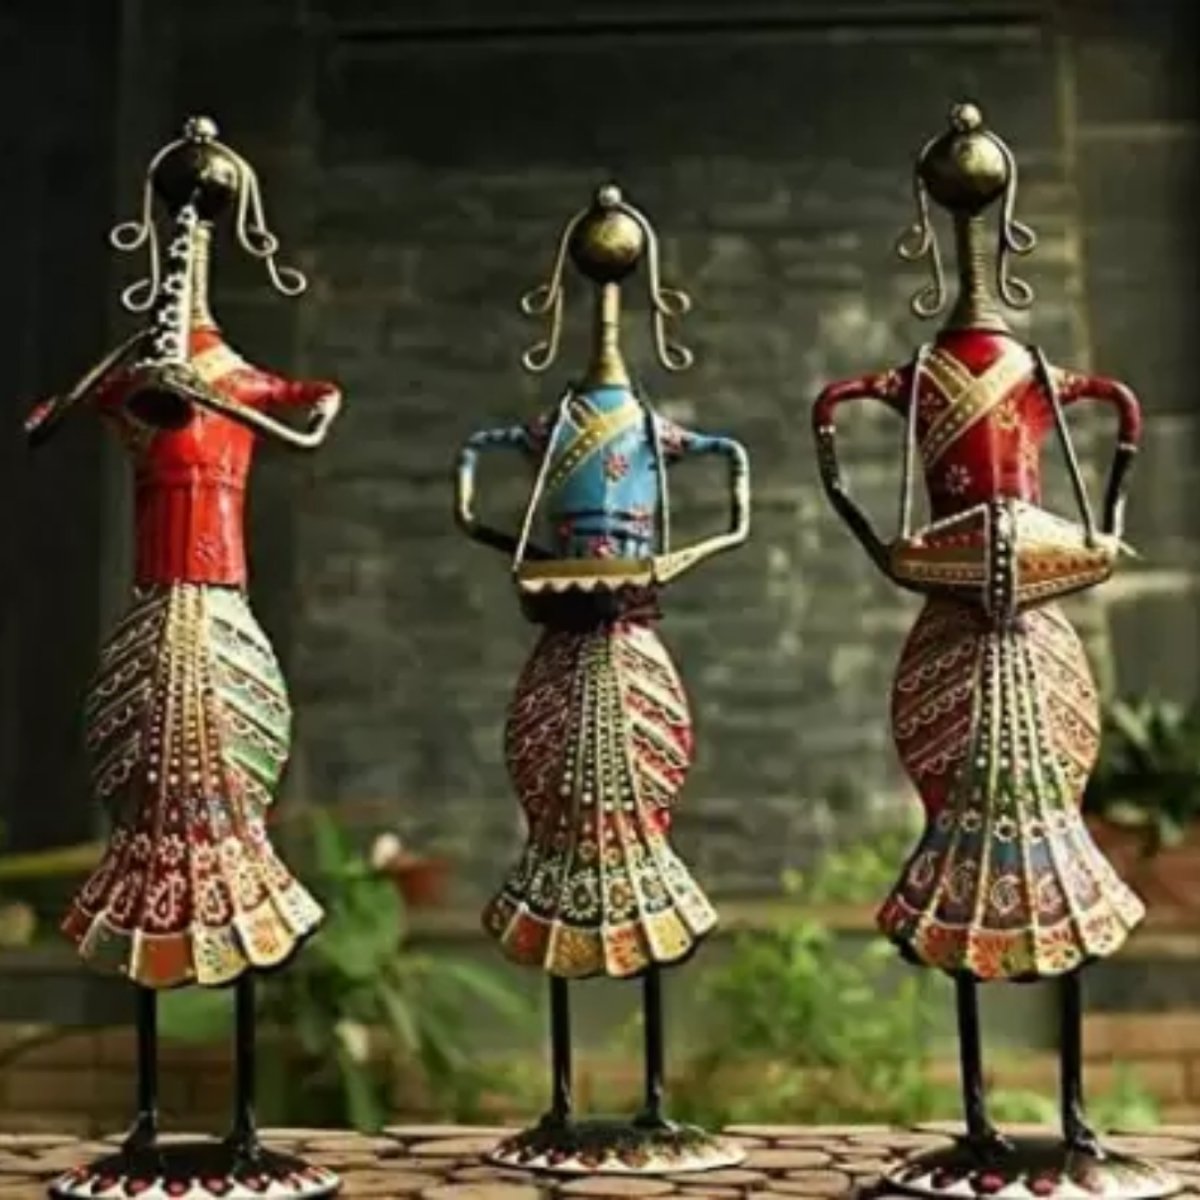 Metalkart Special Instrumental Group of 3 Self-Dependent Ladies For living room (3.5*3*12 Inches)